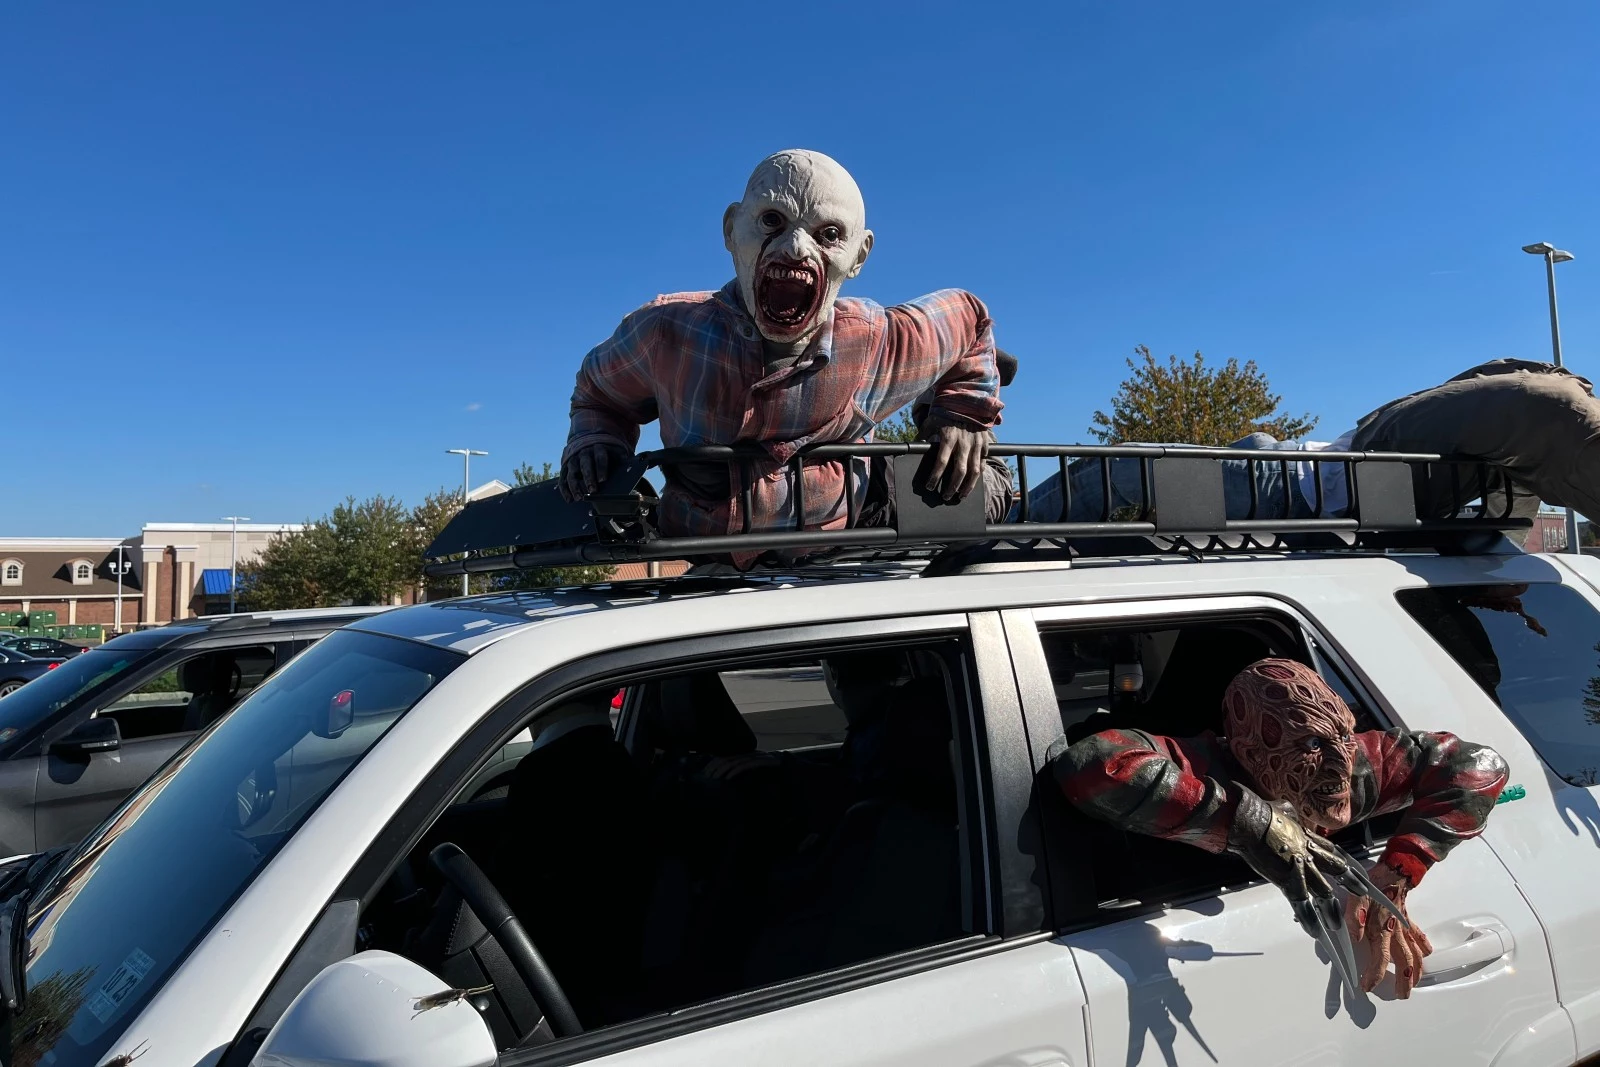 The creepiest Halloween car in NJ belongs to a guy from Somerset image